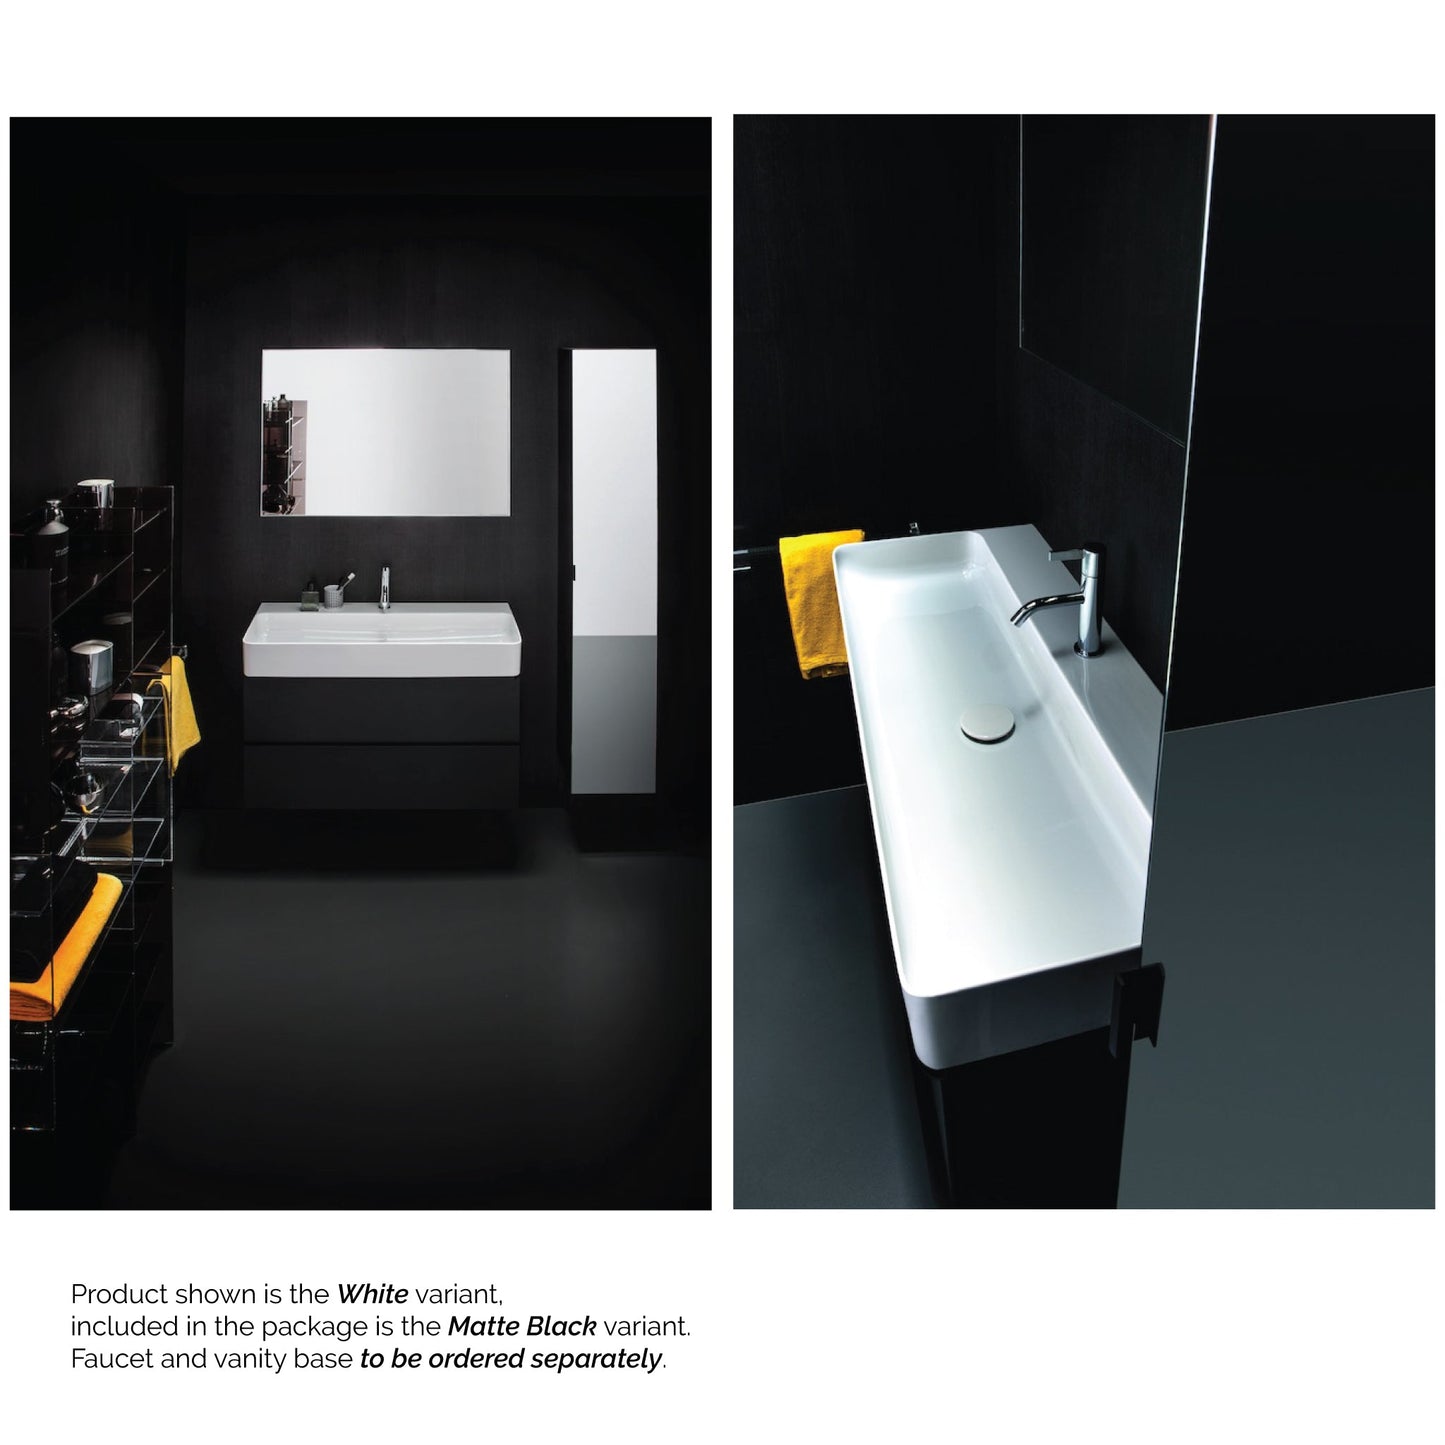 Laufen Val 37" x 17" Matte Black Ceramic Wall-Mounted Bathroom Sink With Faucet Hole